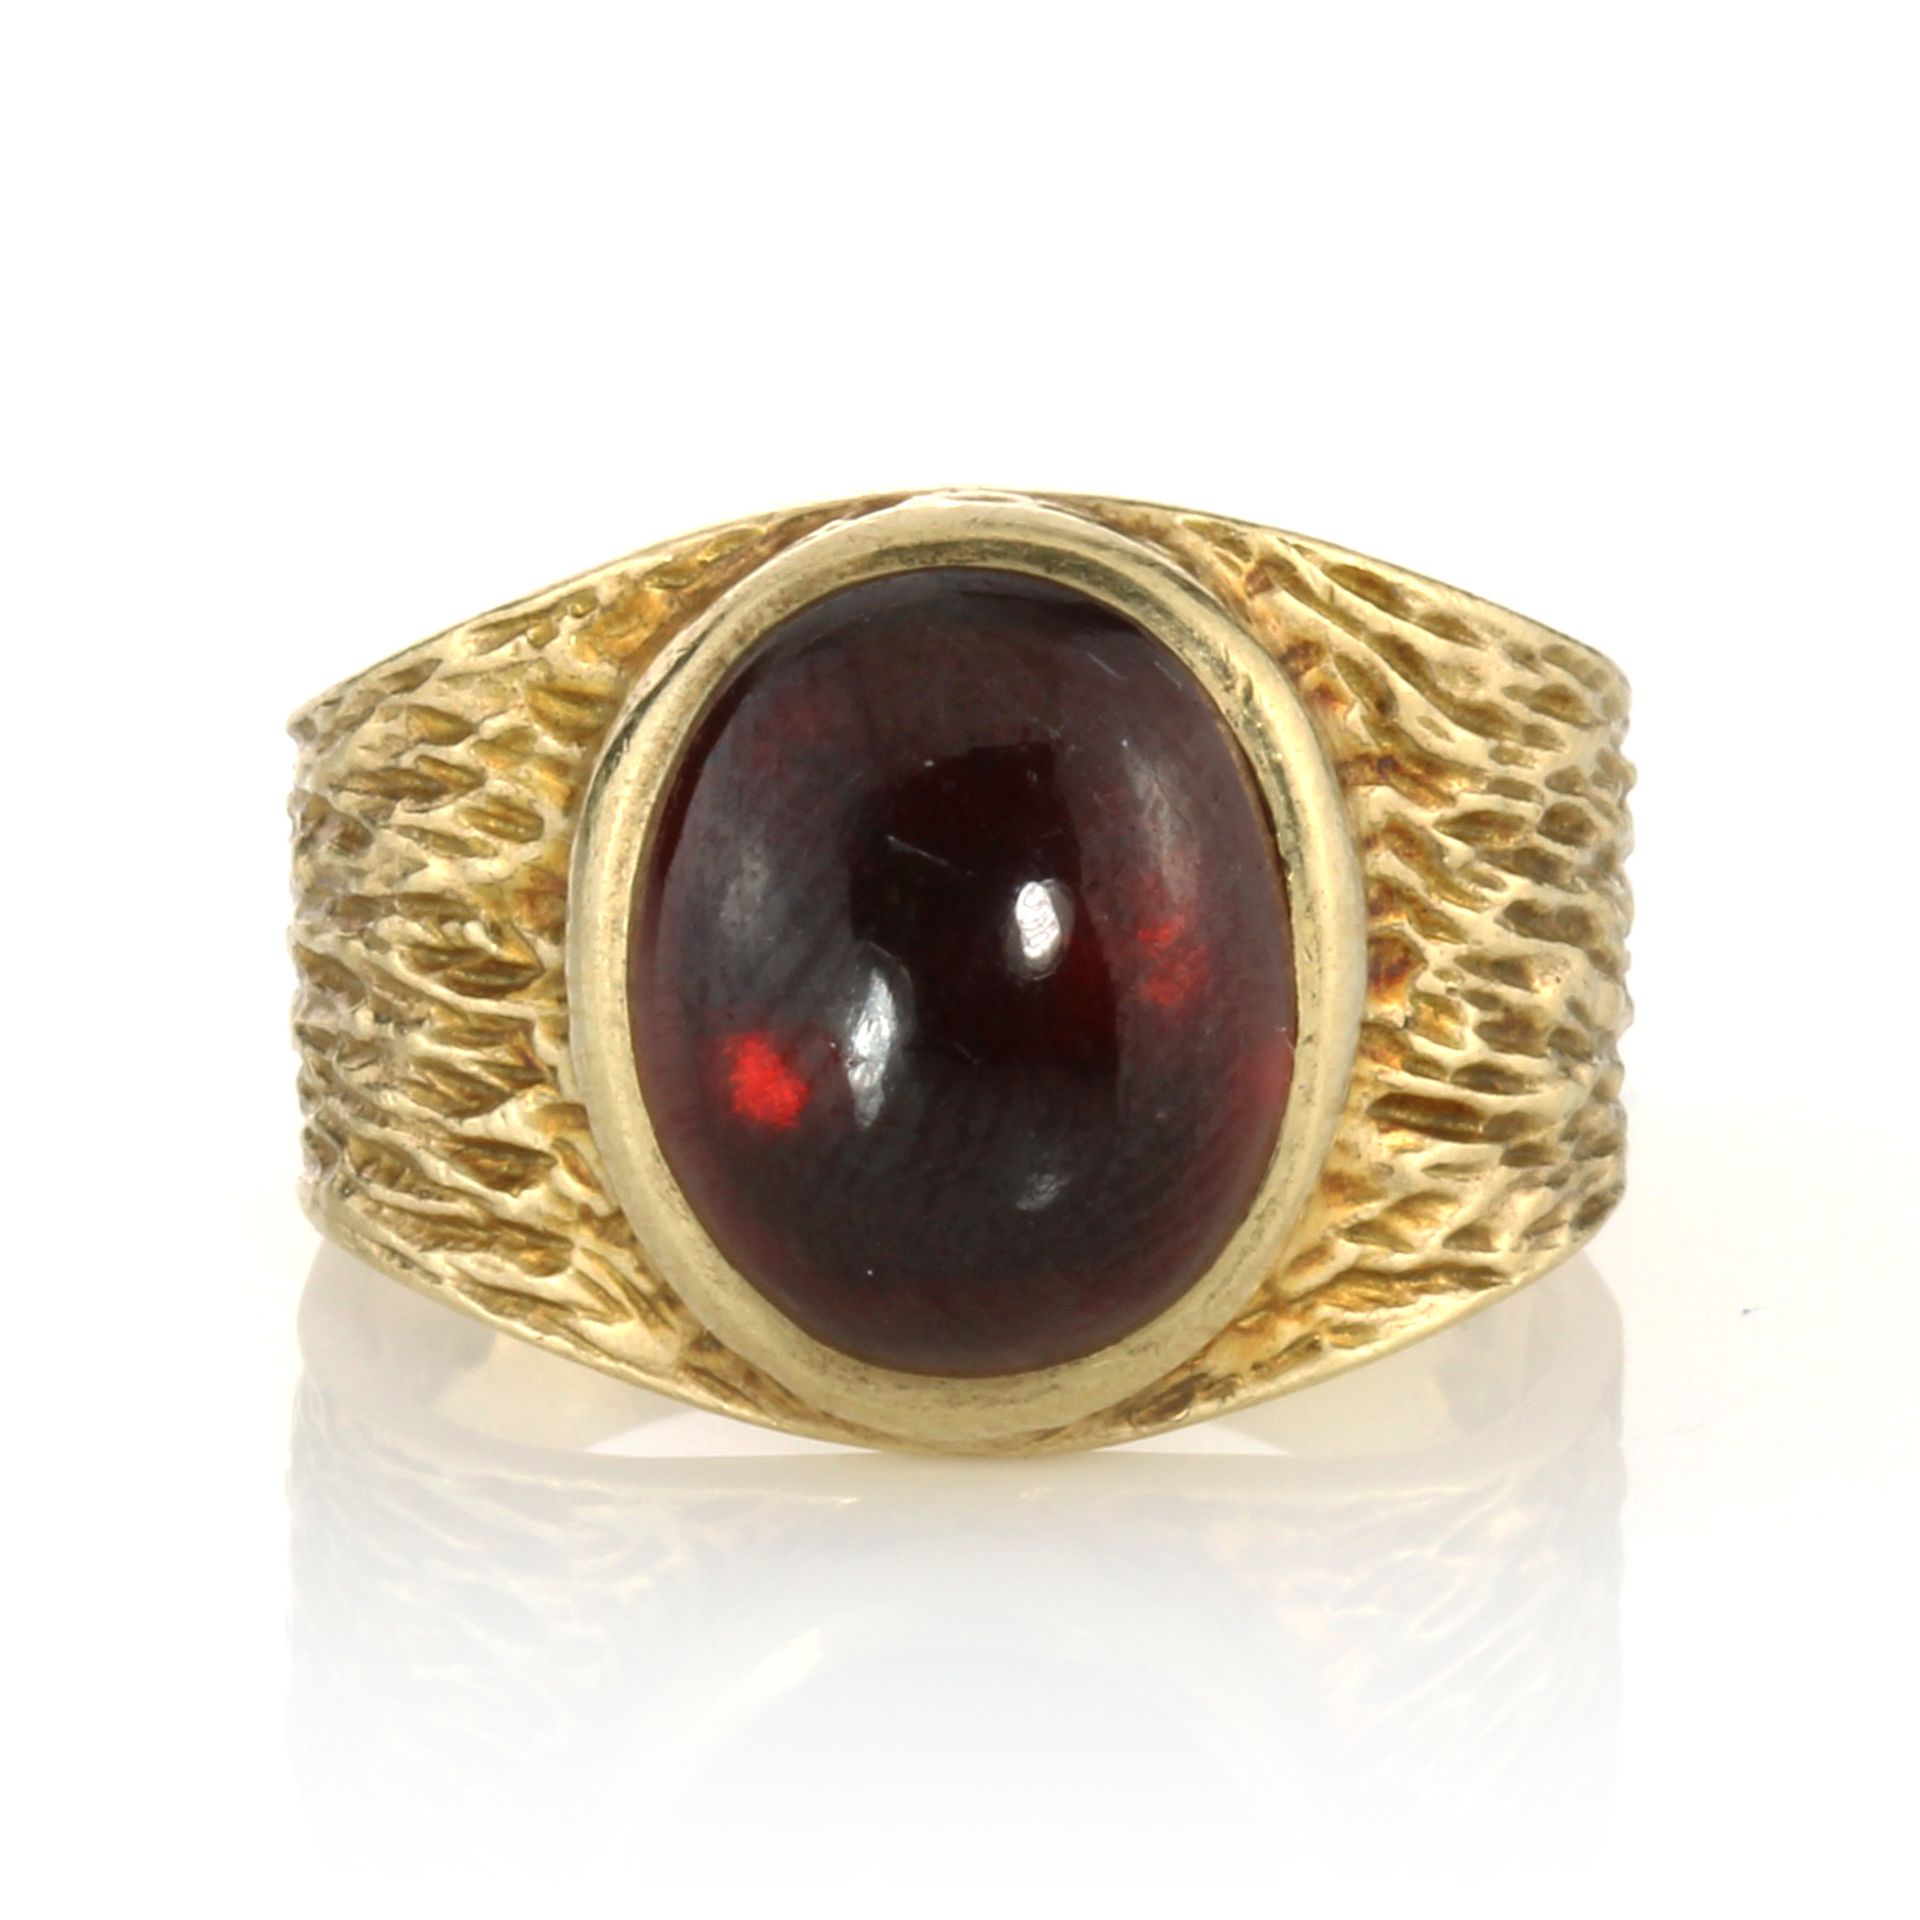 A GARNET DRESS RING, CIRCA 1970 set with a large oval cabochon garnet within a textured band, signed